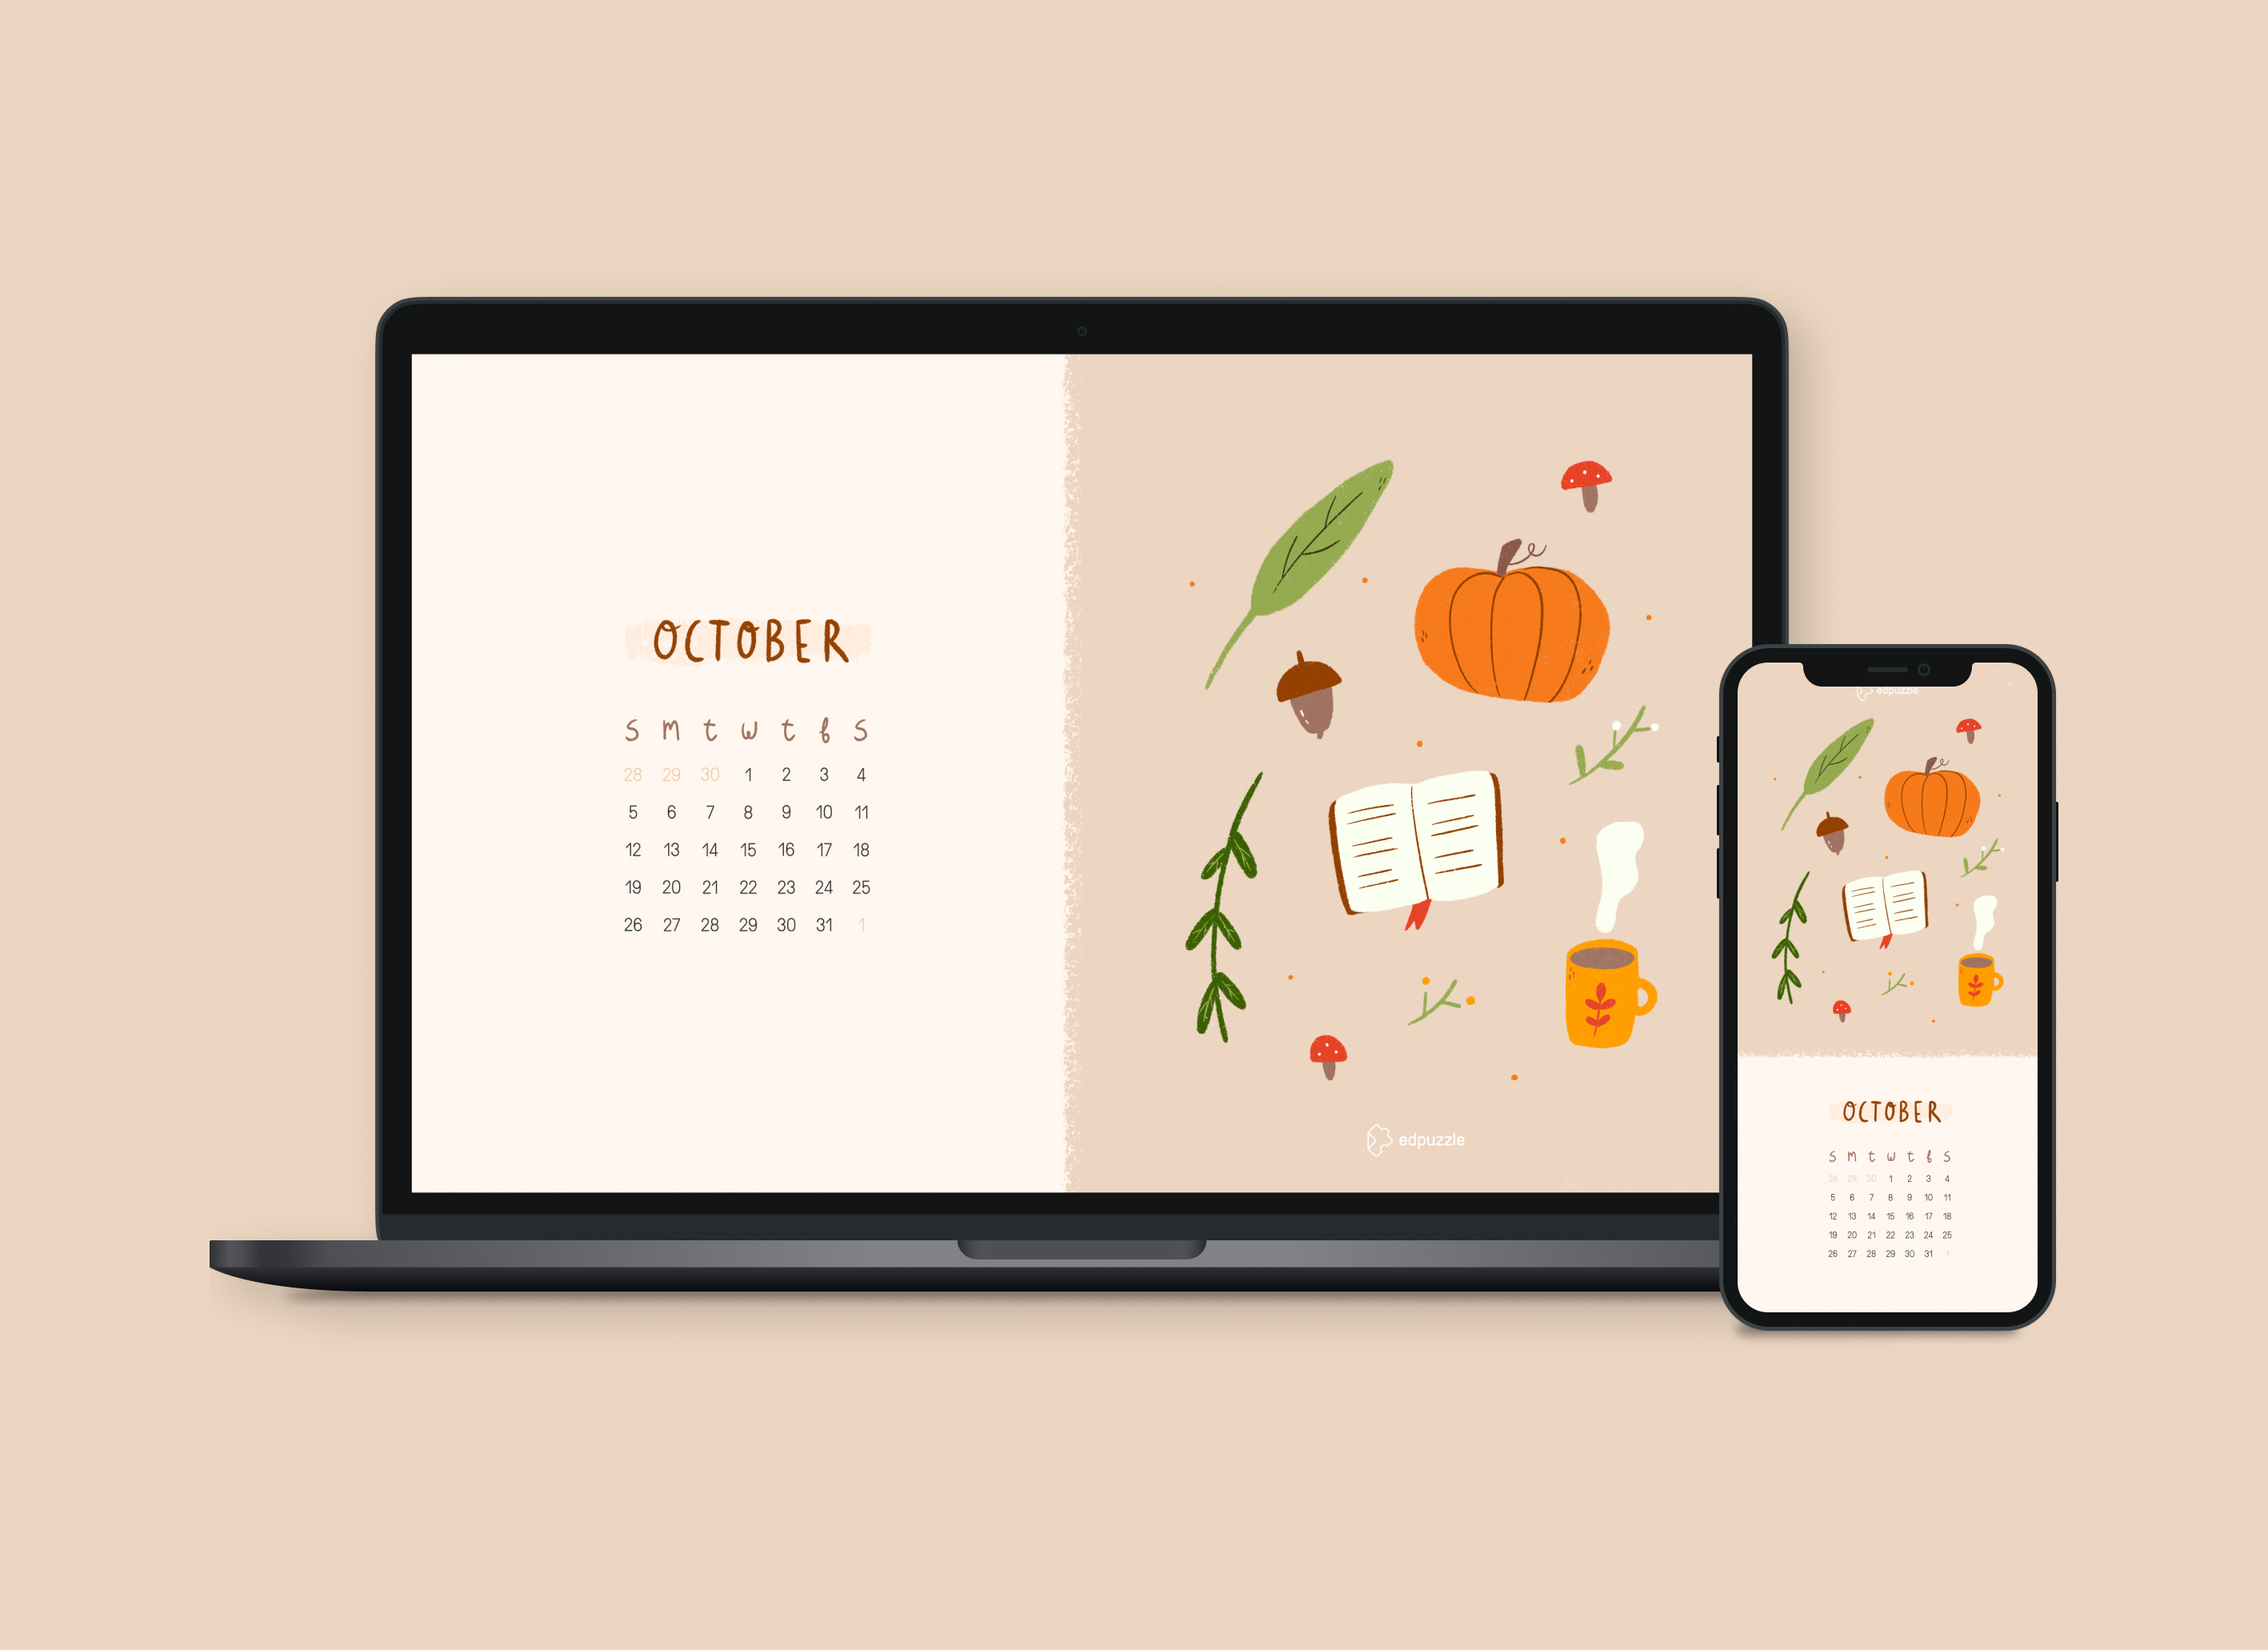 August 2021 wallpapers – 33 FREE calendars for desktop and phones!